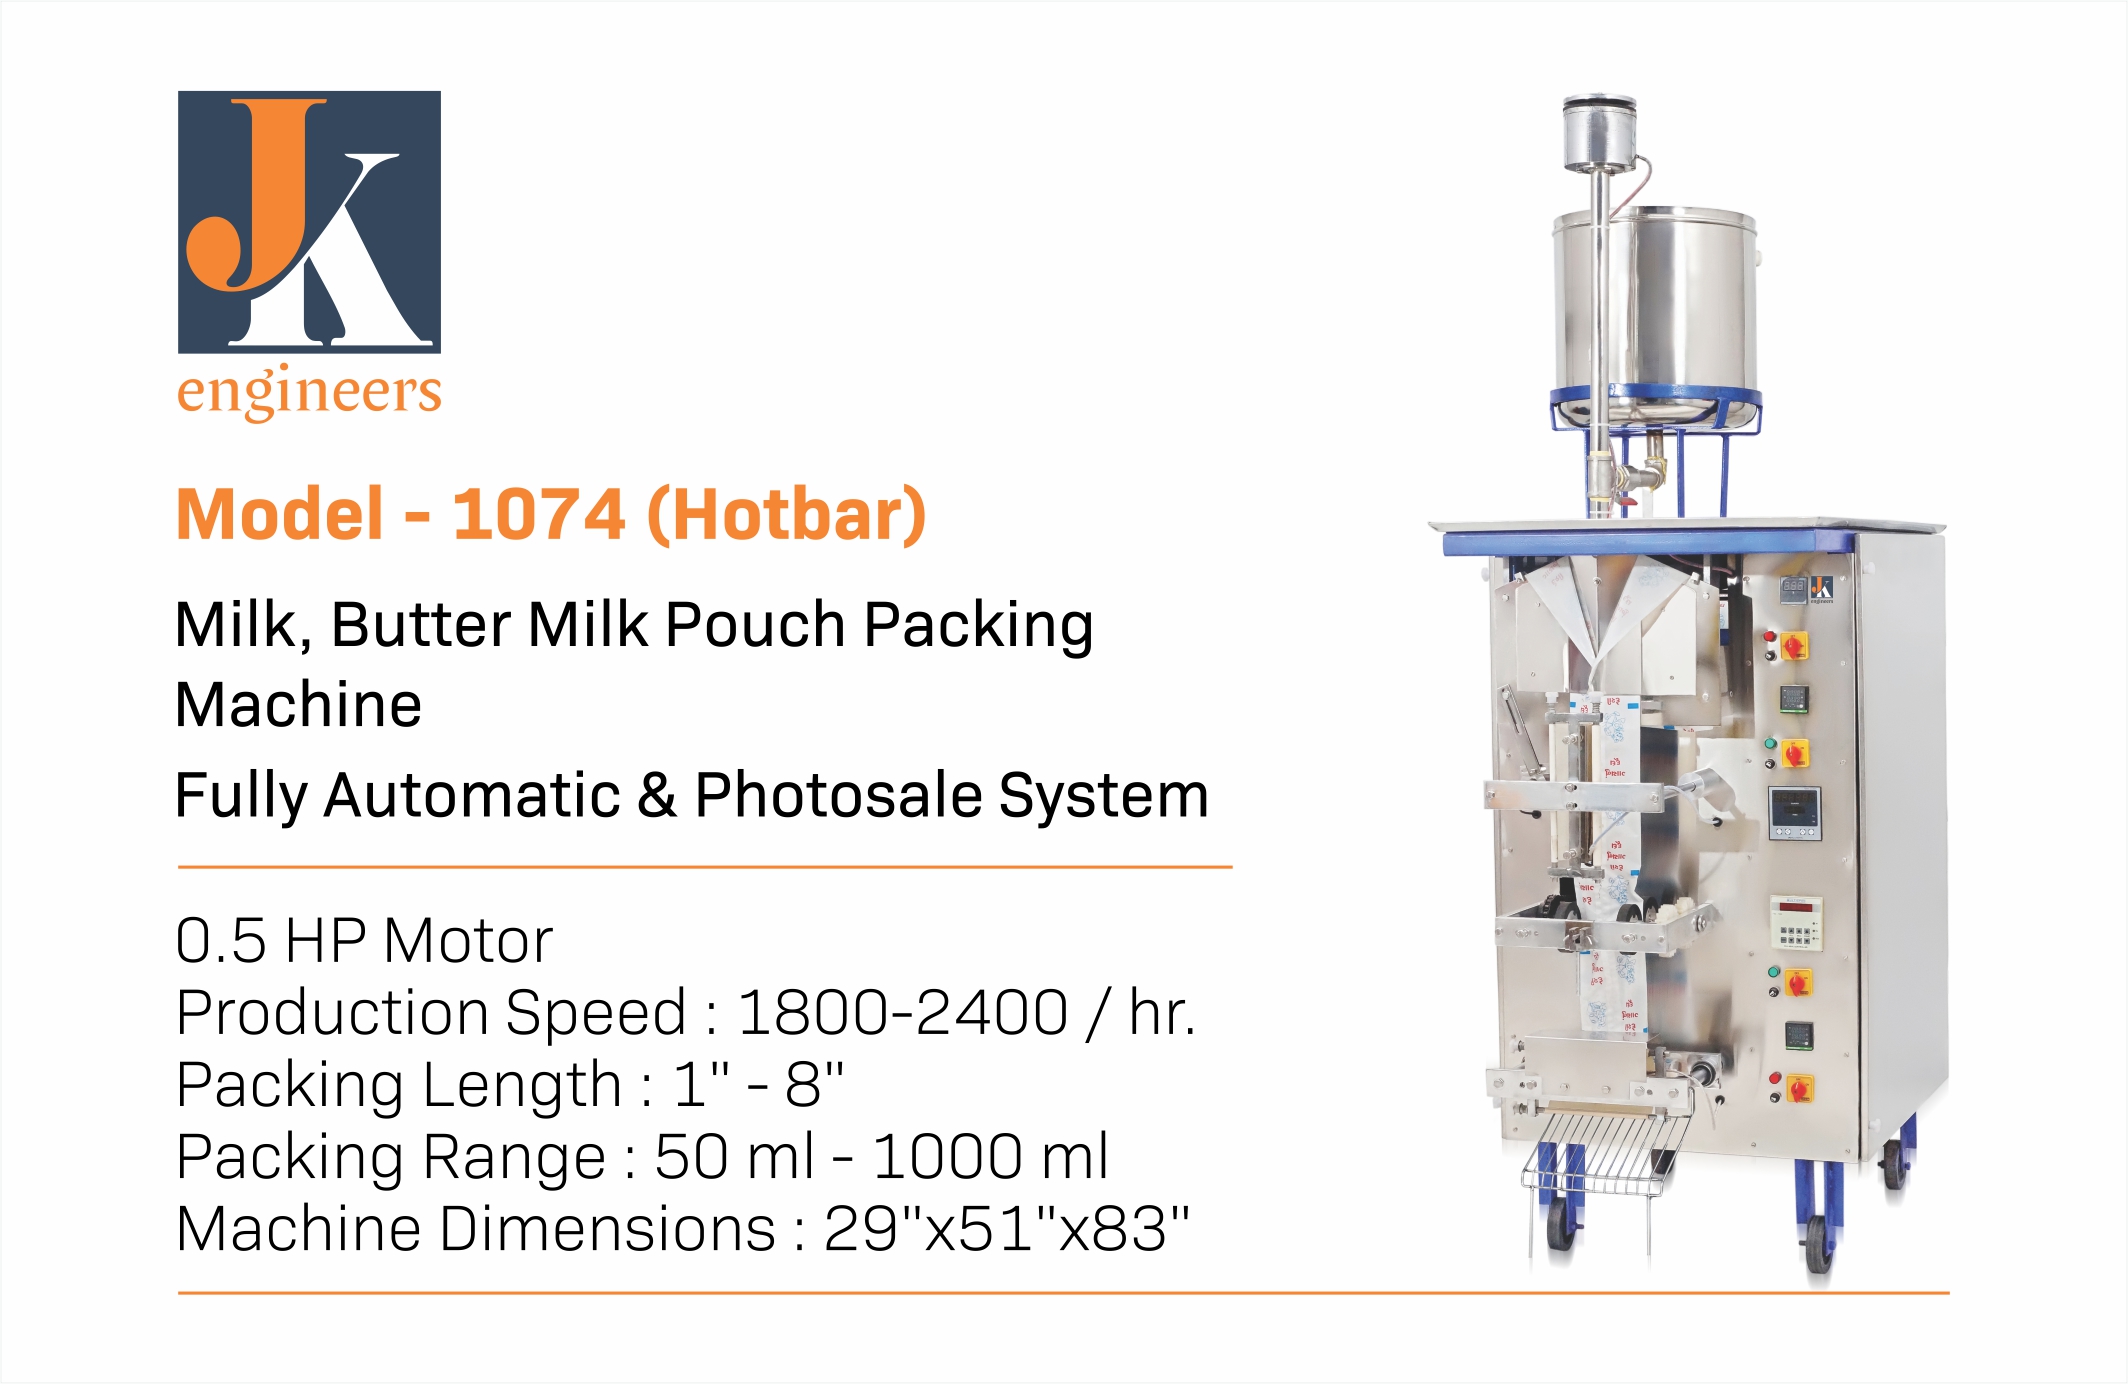 Pouch Packing Machine fully Automatic & photo-sale System